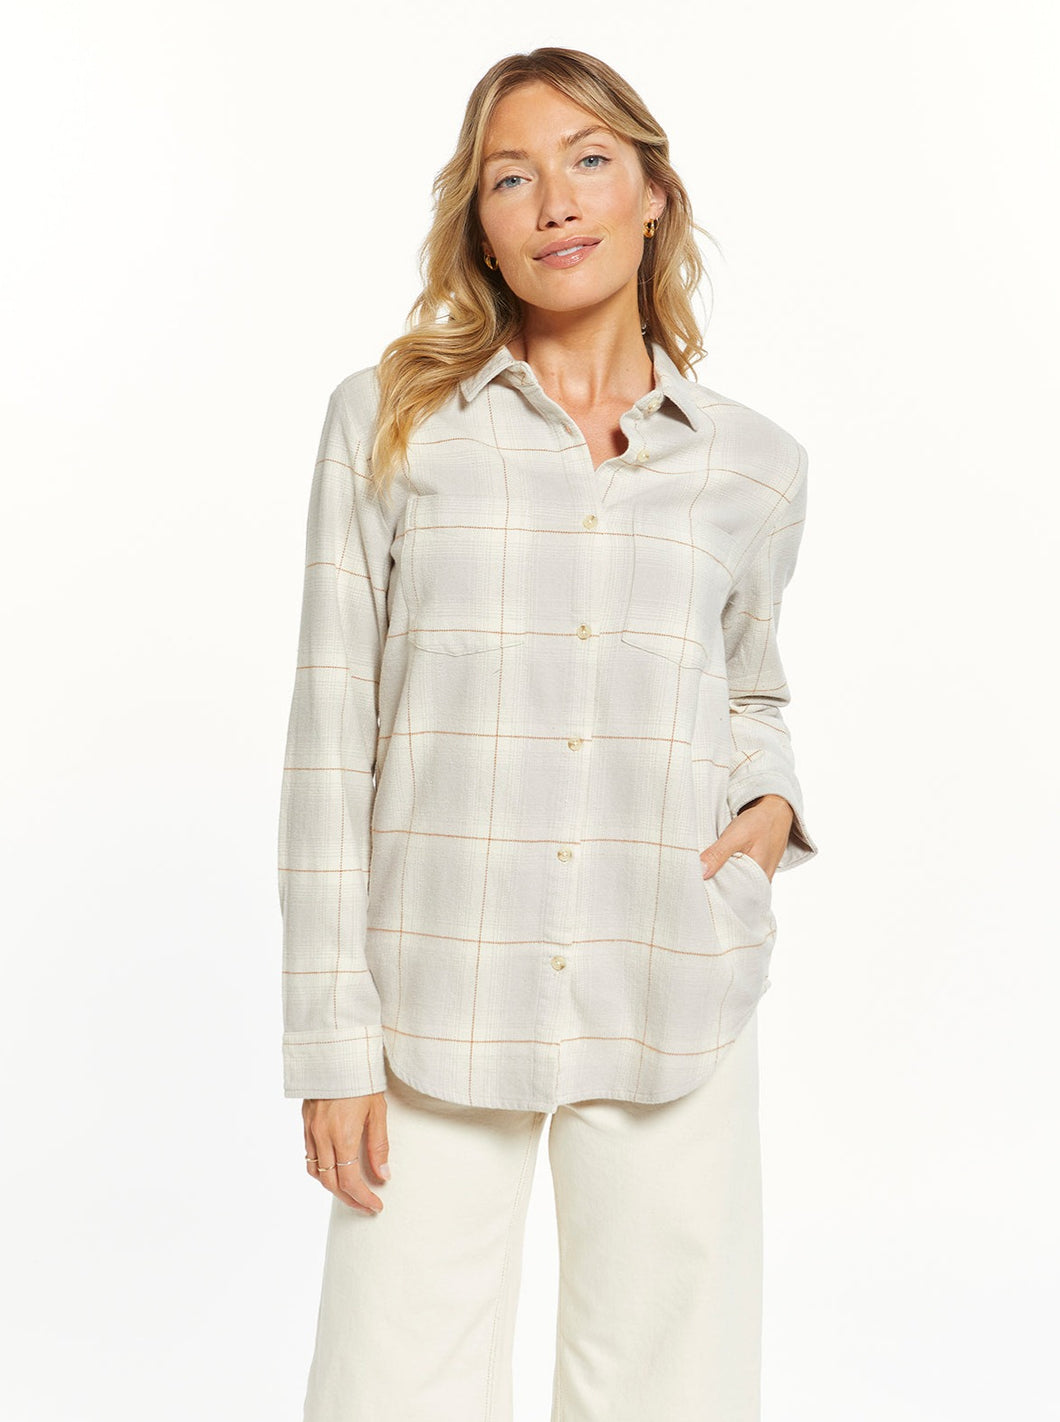 This super cozy flannel can be worn buttoned up or open as a layer. Featuring button front closure, shirt tail hem and yes, pockets!  Collared neckline Button front closure 100% Cotton Machine Wash Cold